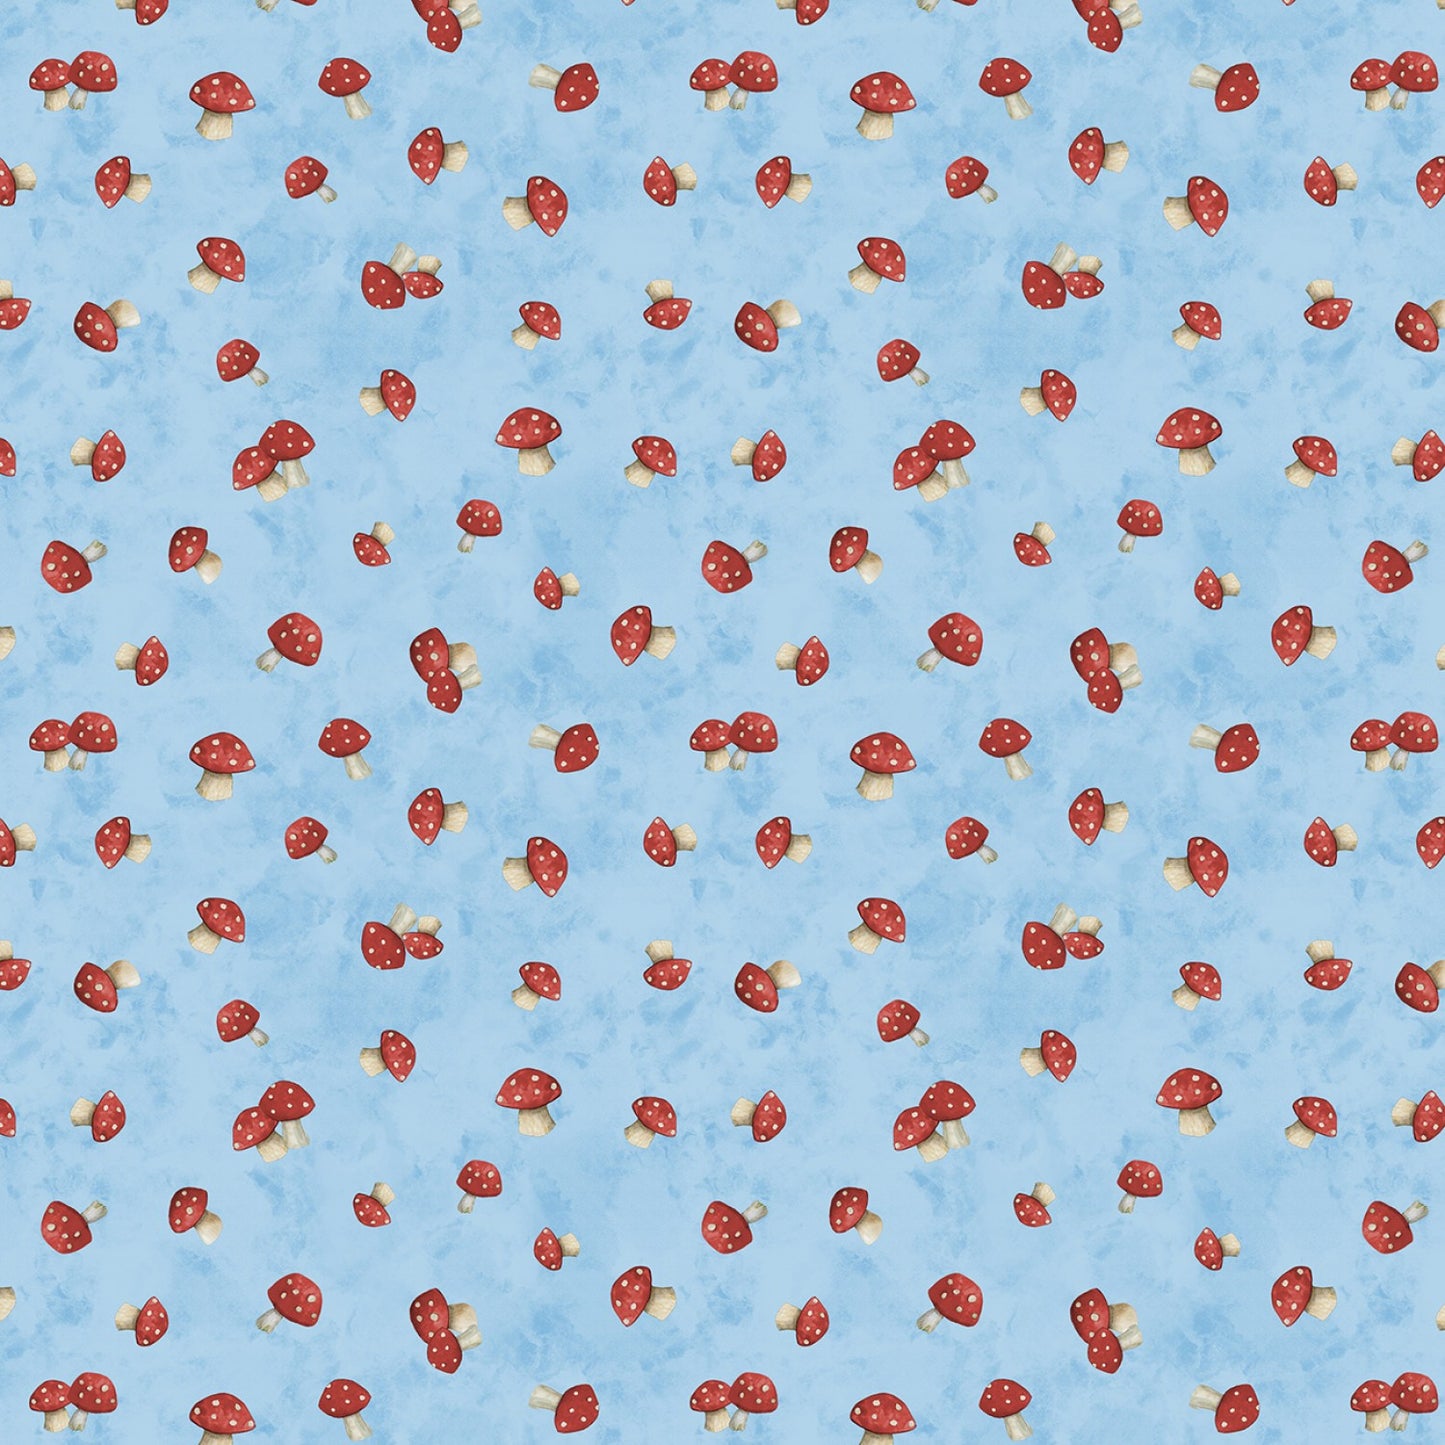 New Arrival: Buzzin with My Gnome-iezz  by Susan Winget Mushroom Toss Blue    39839-431 Cotton Woven Fabric